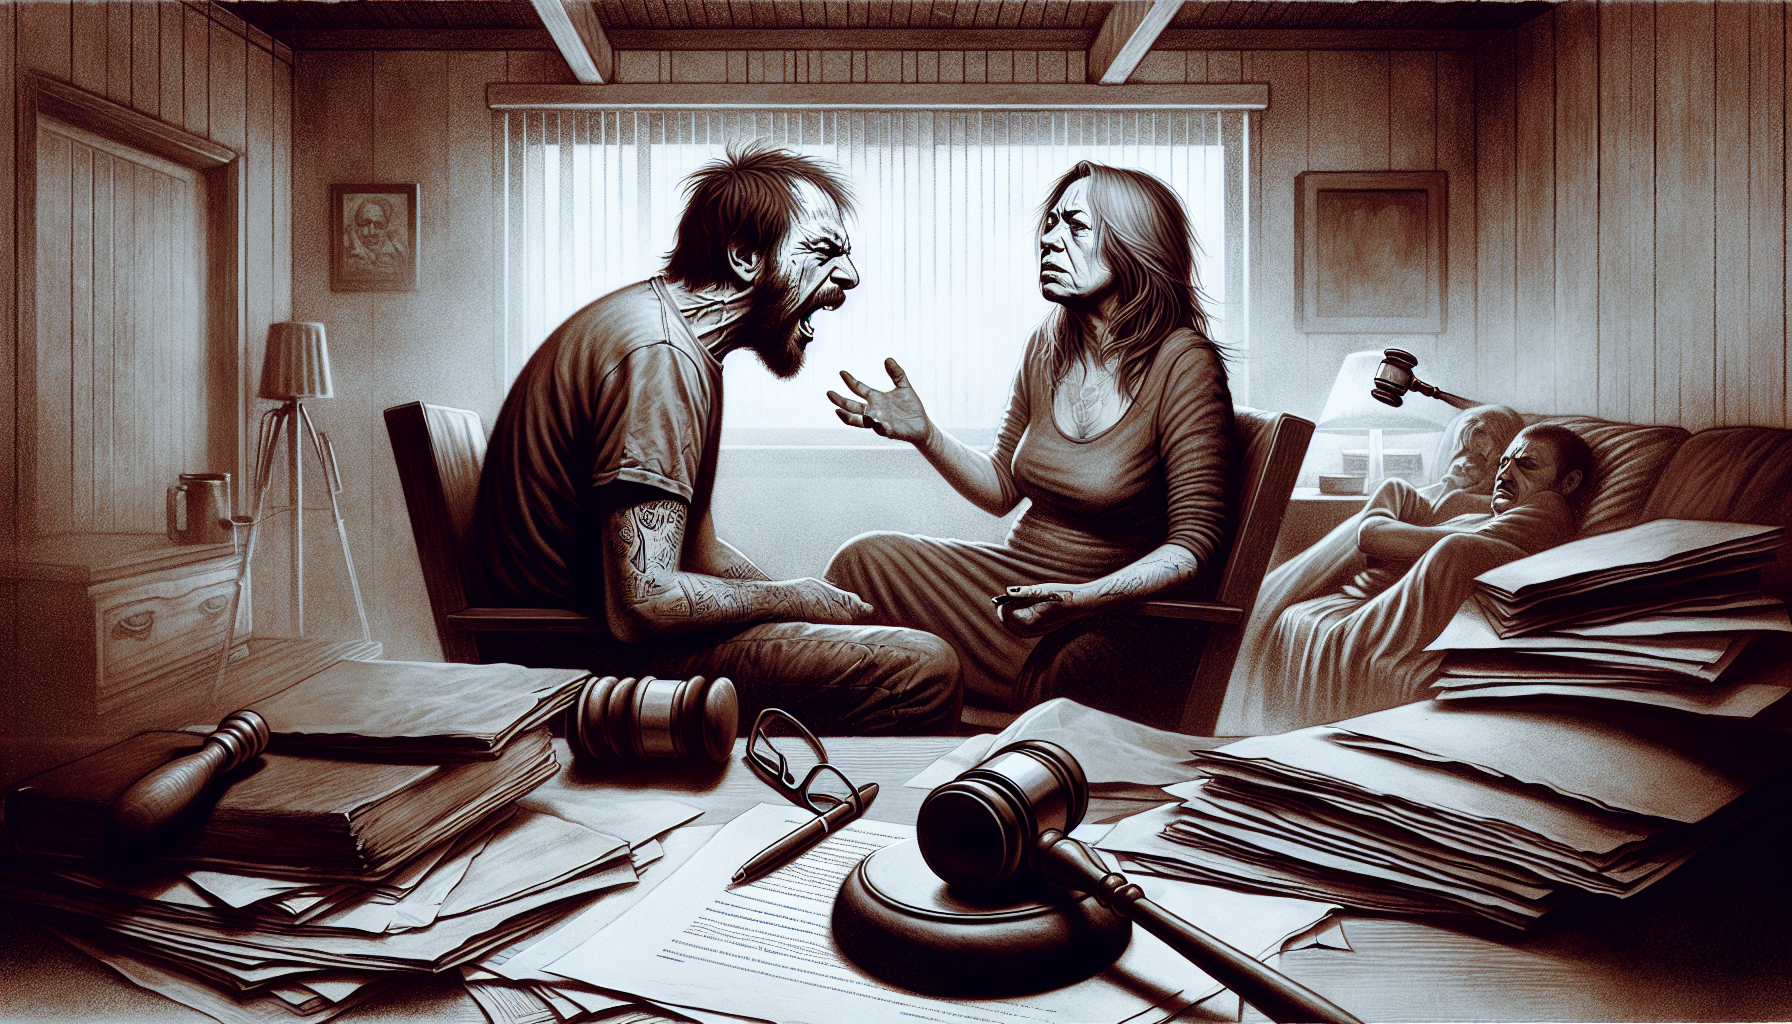 Illustration of a couple in a disagreement, representing potential complications of evicting a partner